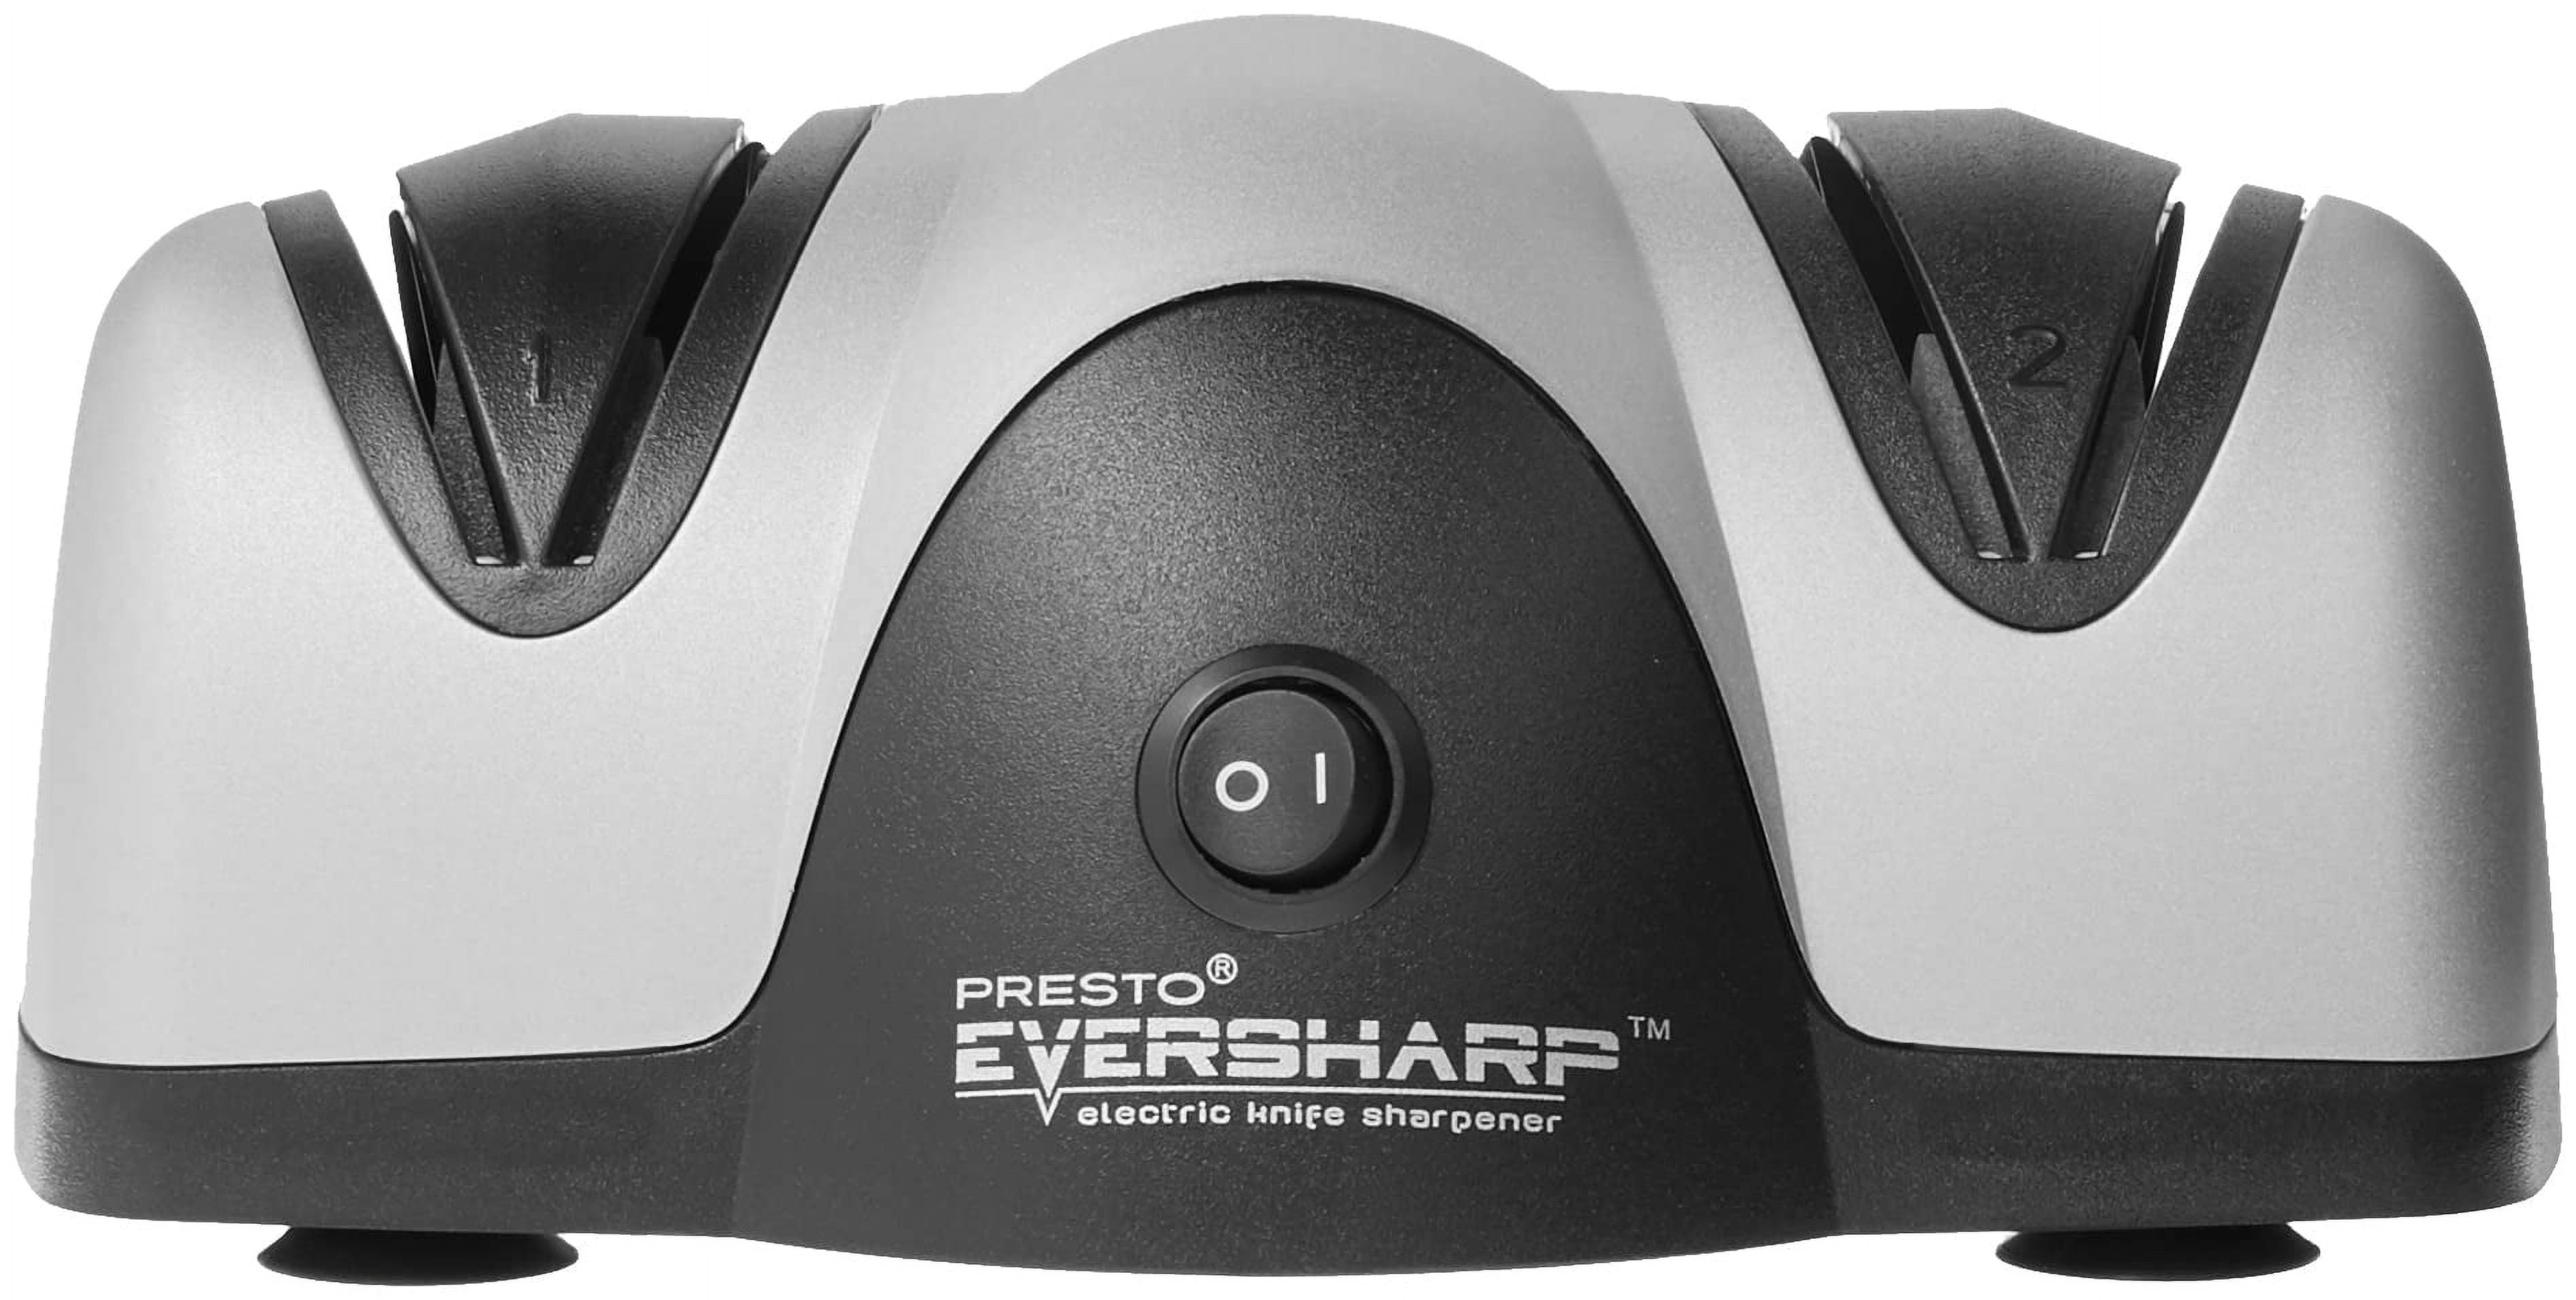 Food Network on X: Remember: A sharp knife is a SAFE knife! Here's our top  pick for an electric knife sharpener 🔪 Get the link for our favorite – the  Presto EverSharp